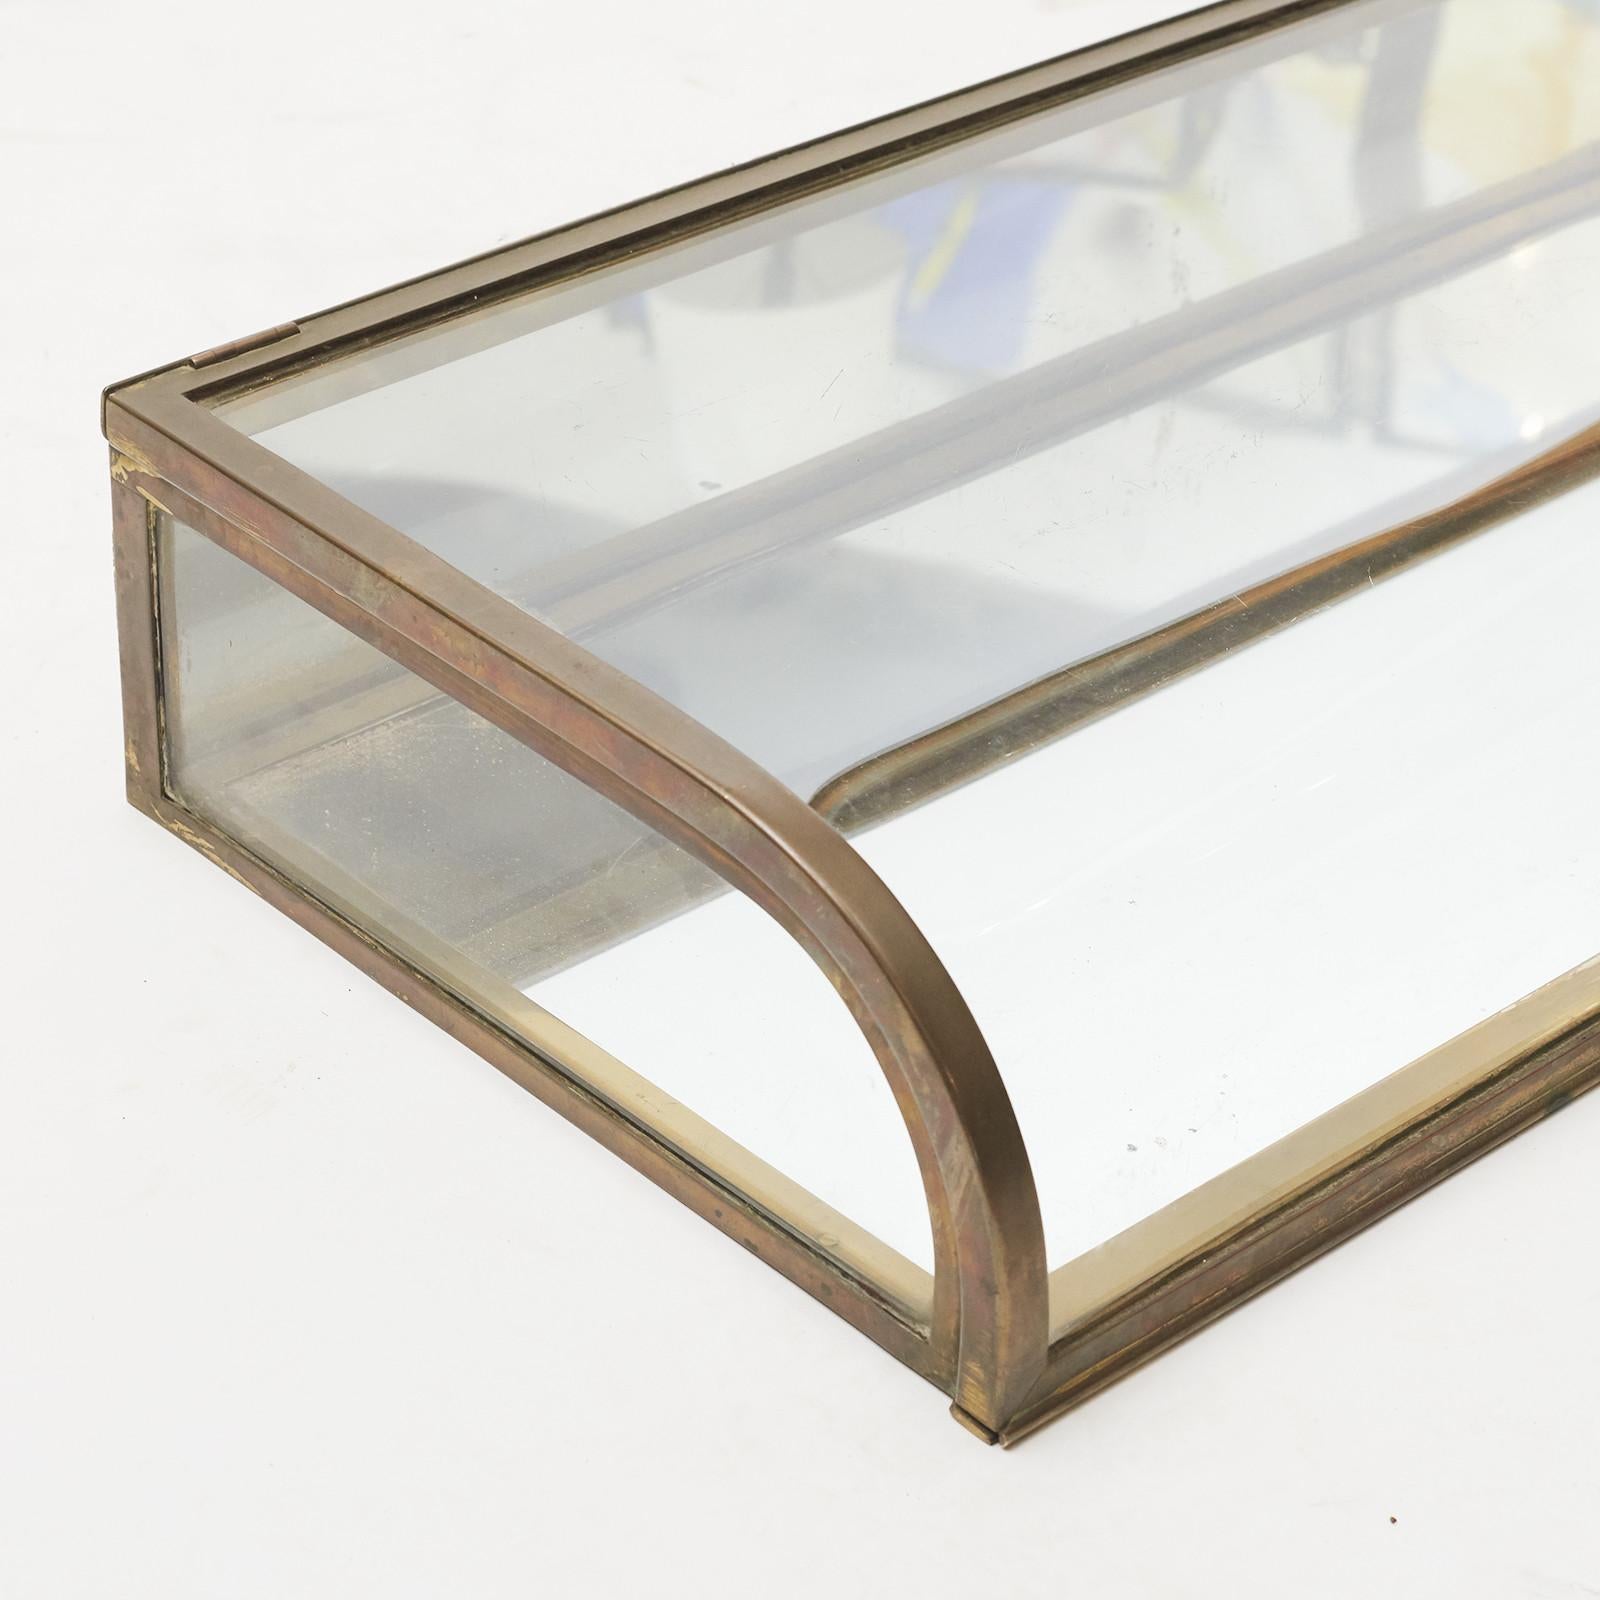 Art Deco table display case. Brass, clear glass, bottom and rear panel covered with mirror. Made by Siegel Paris, circa 1920. Unspoiled original condition.